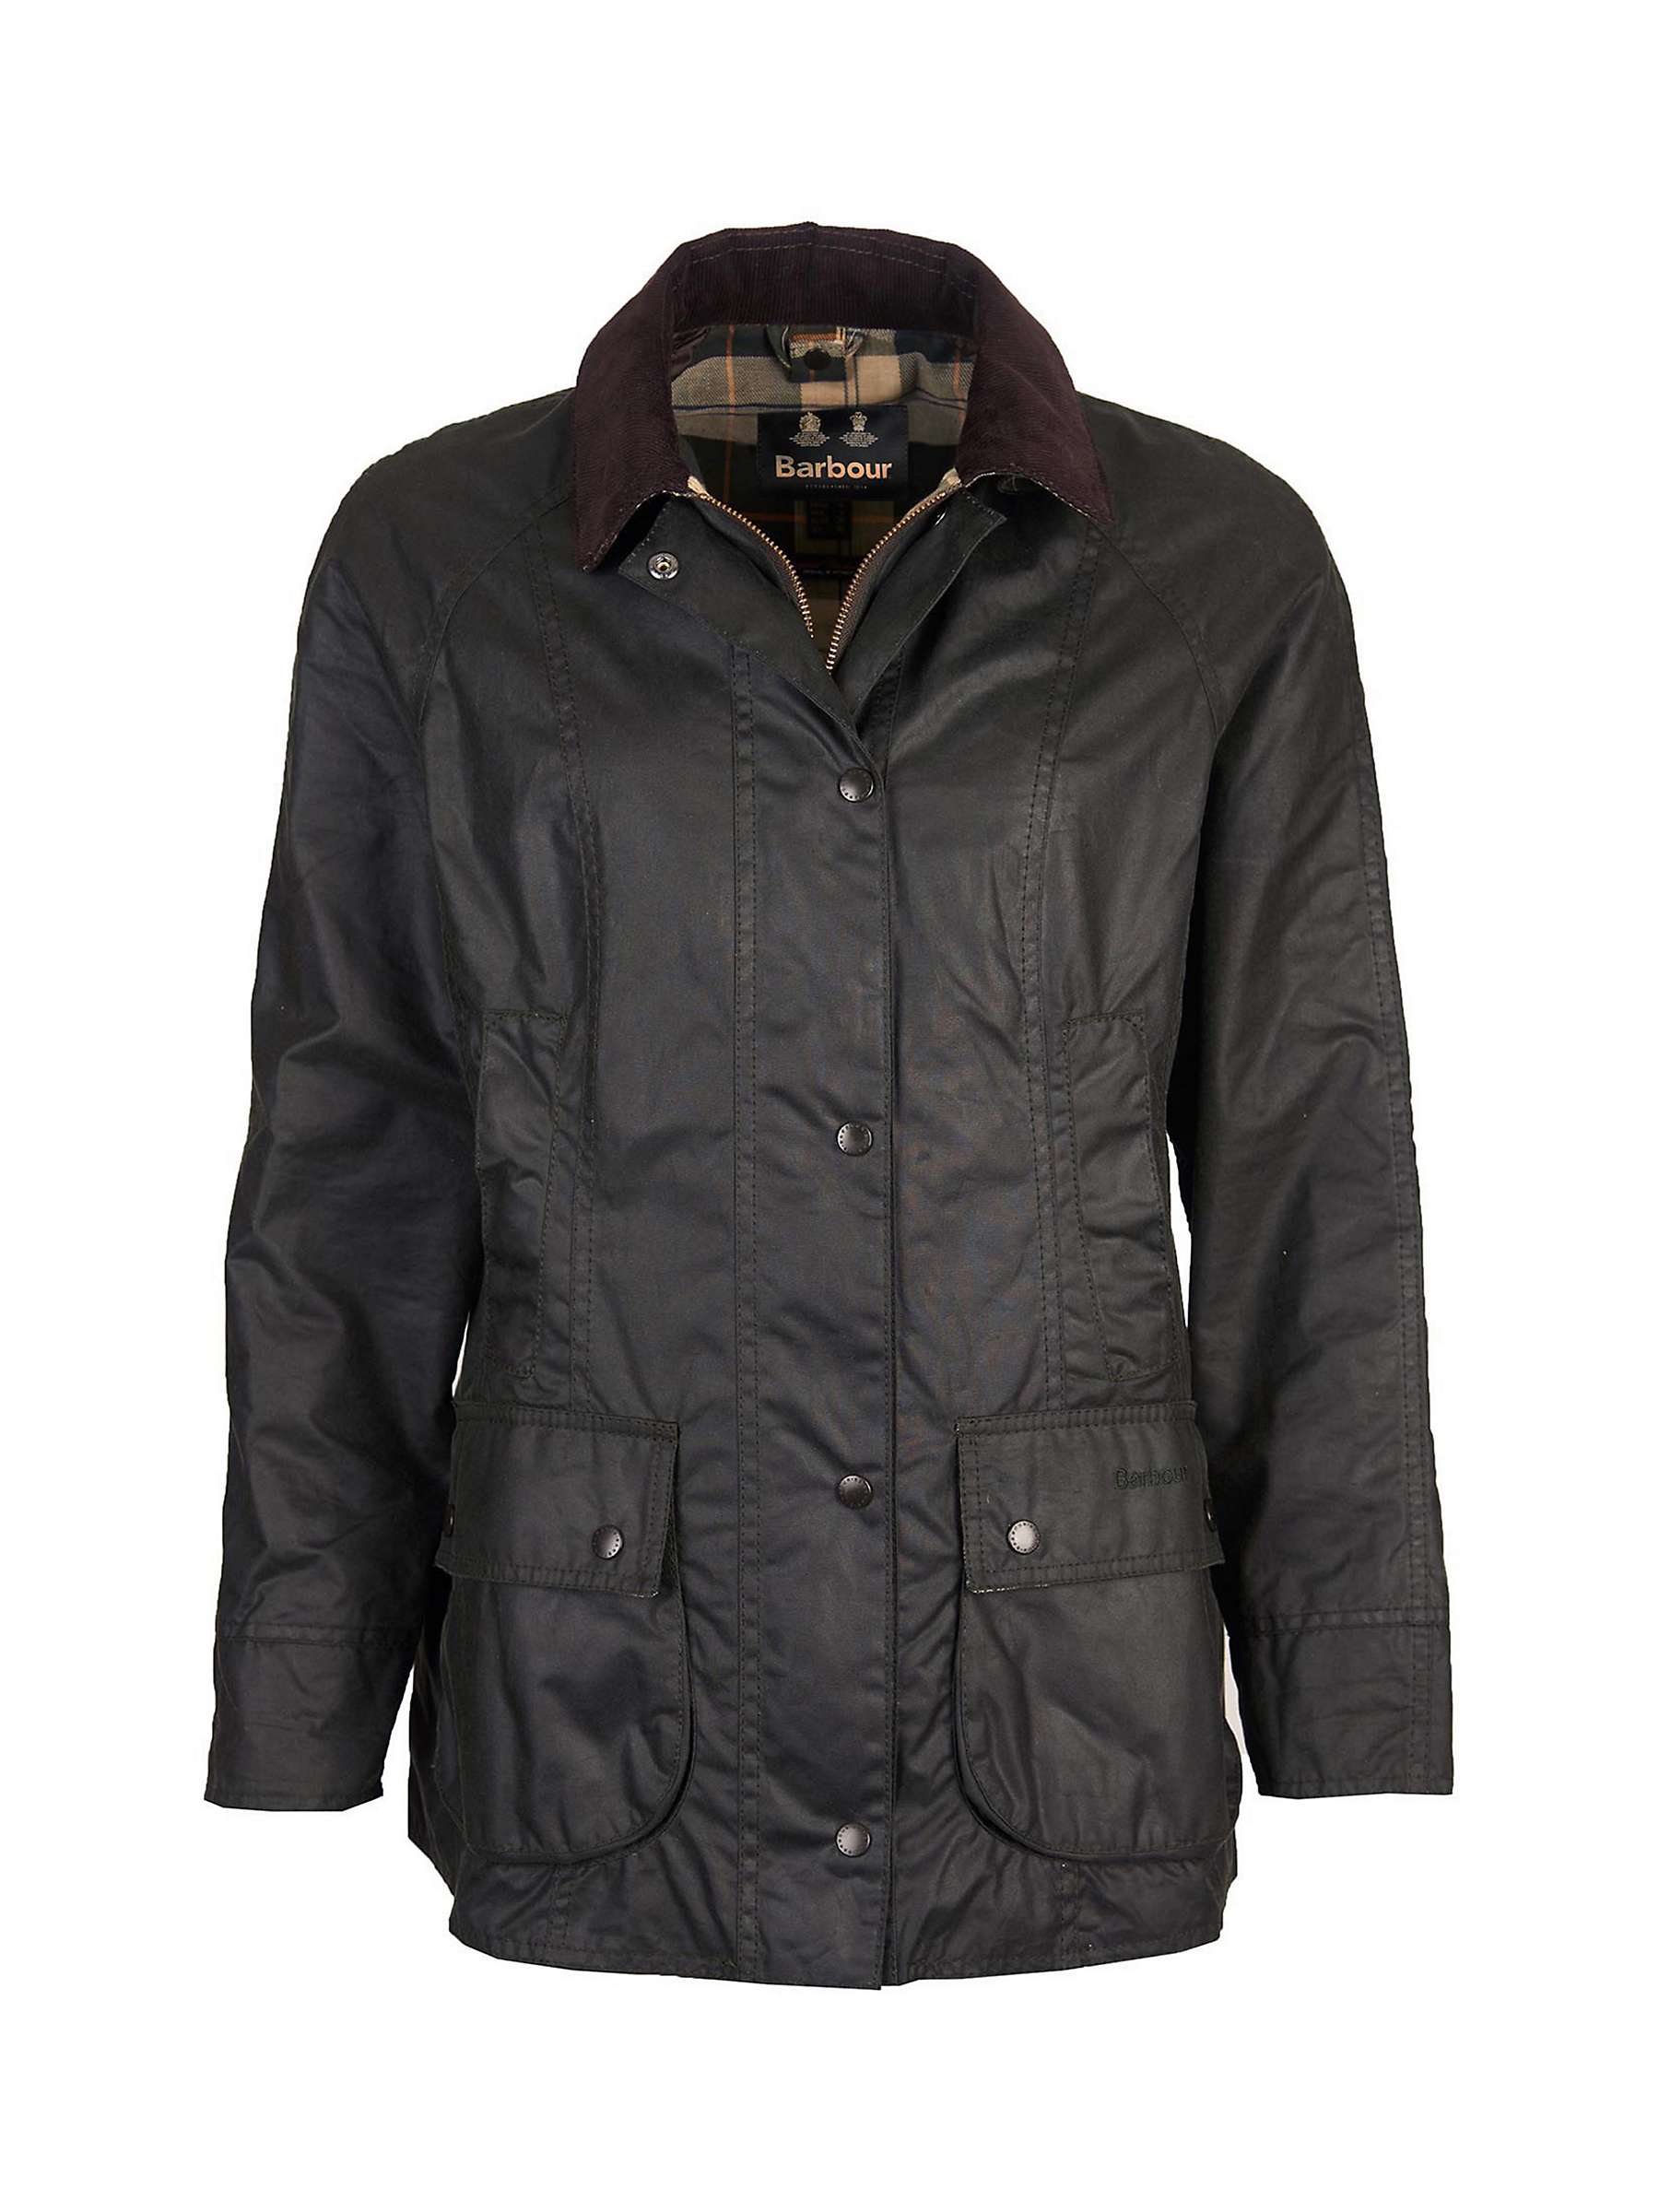 Buy Barbour Classic Beadnell Waxed Jacket, Sage Online at johnlewis.com